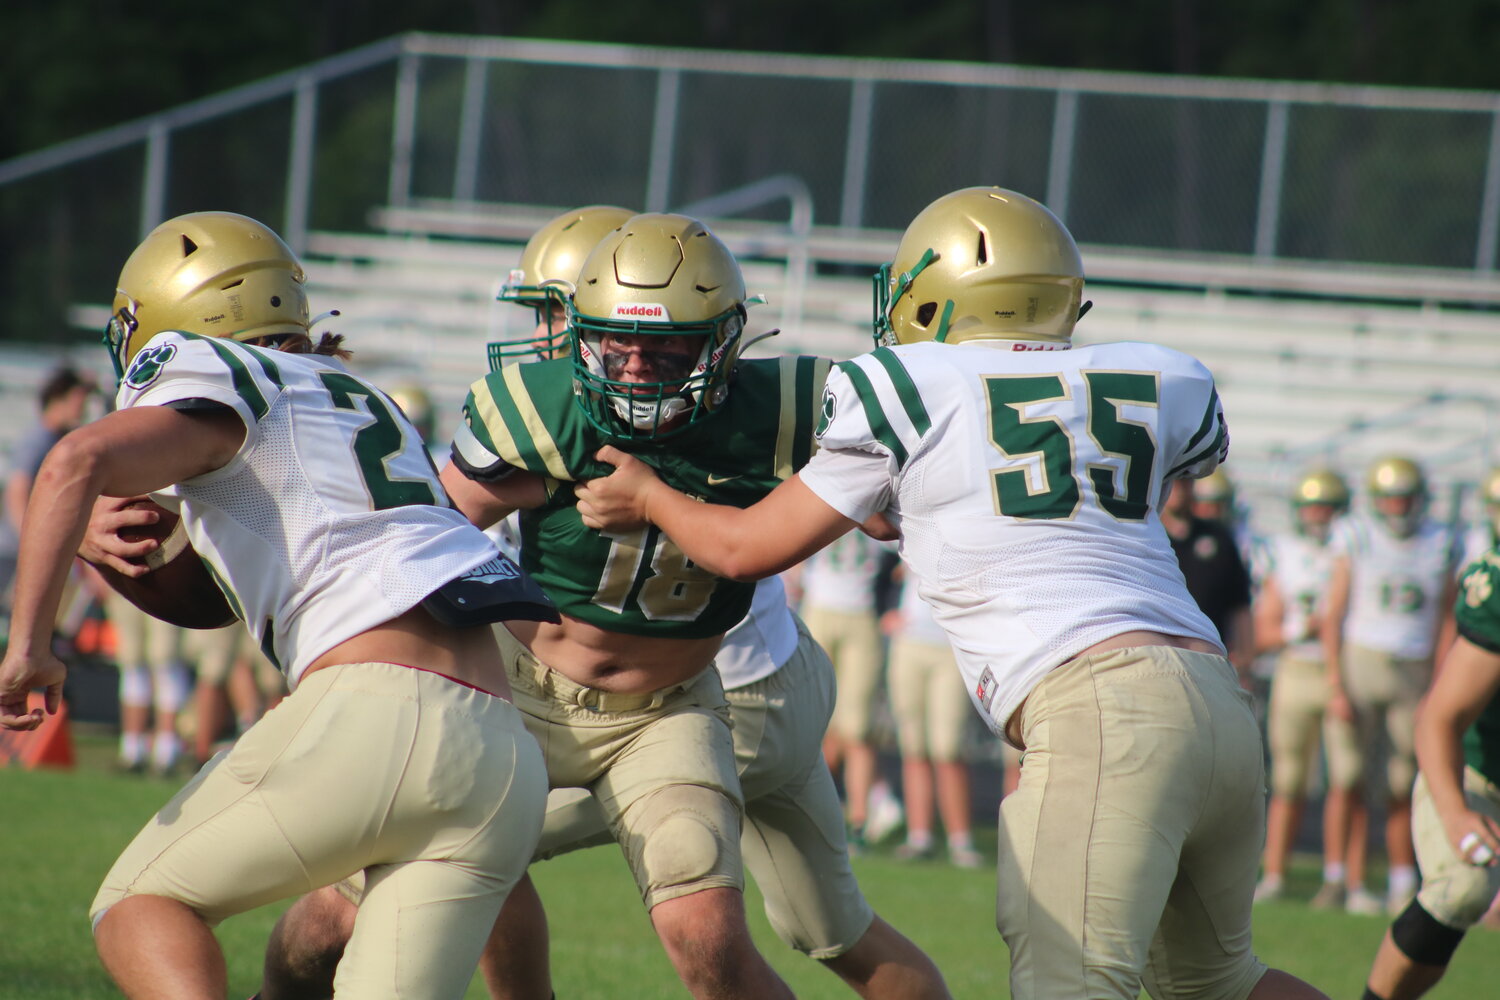 Peyton Mooningham (No. 18) fights through a block and looks to meet the ball carrier in the backfield.